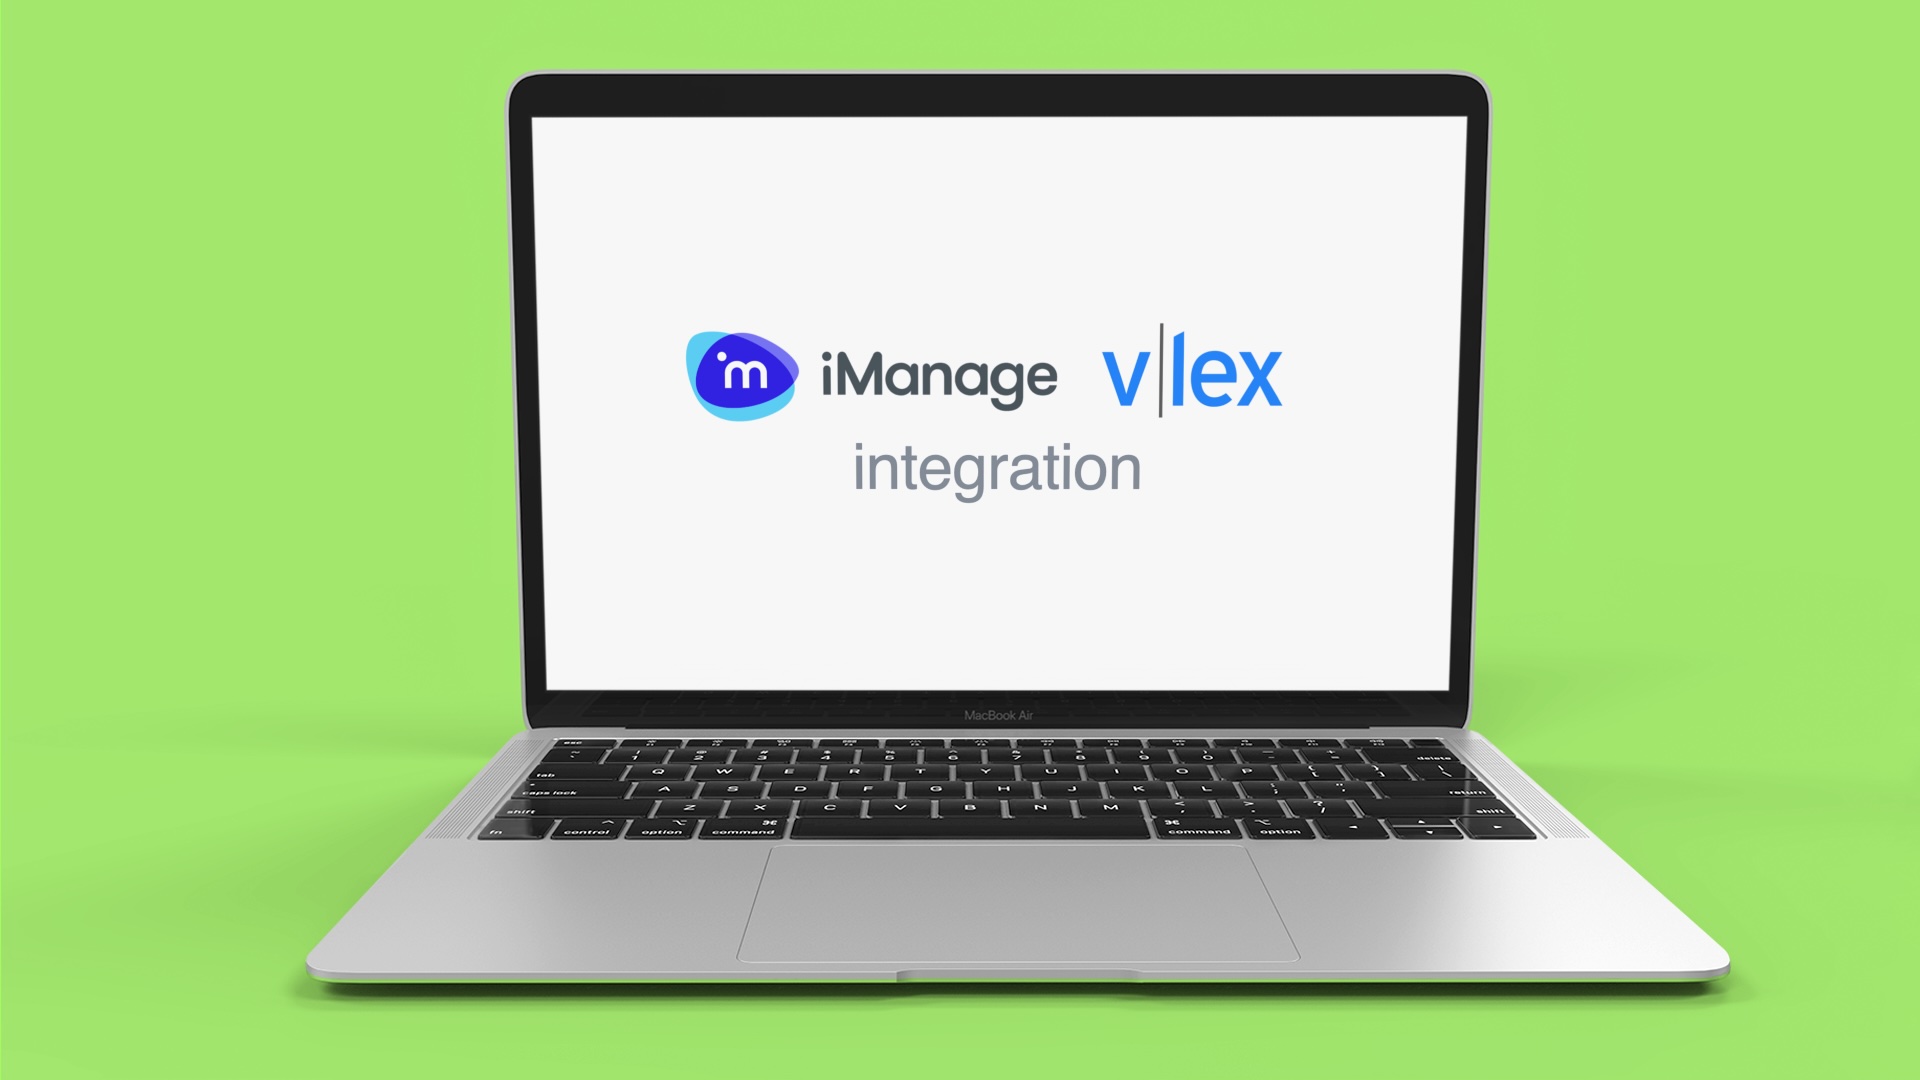 vLex-iManage Partnership Enables Single AI-Powered Search of Internal Firm Documents and External Legal Resources, As Well As Automatic Filing of Federal Litigation Documents